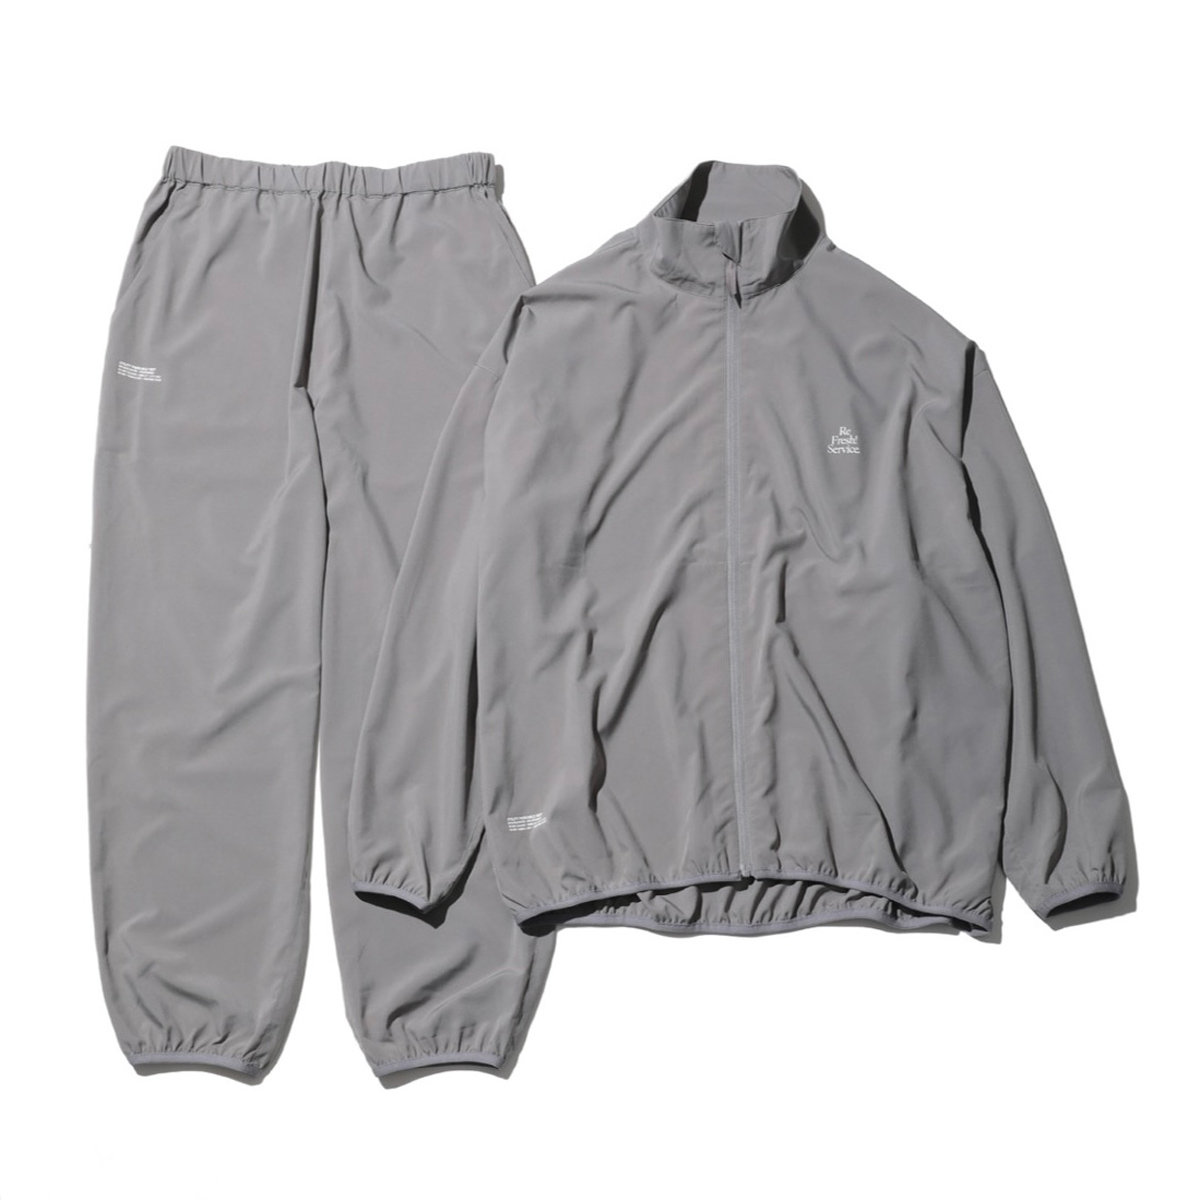 FreshService UTILITY PACKABLE SUIT GRAY | camillevieraservices.com